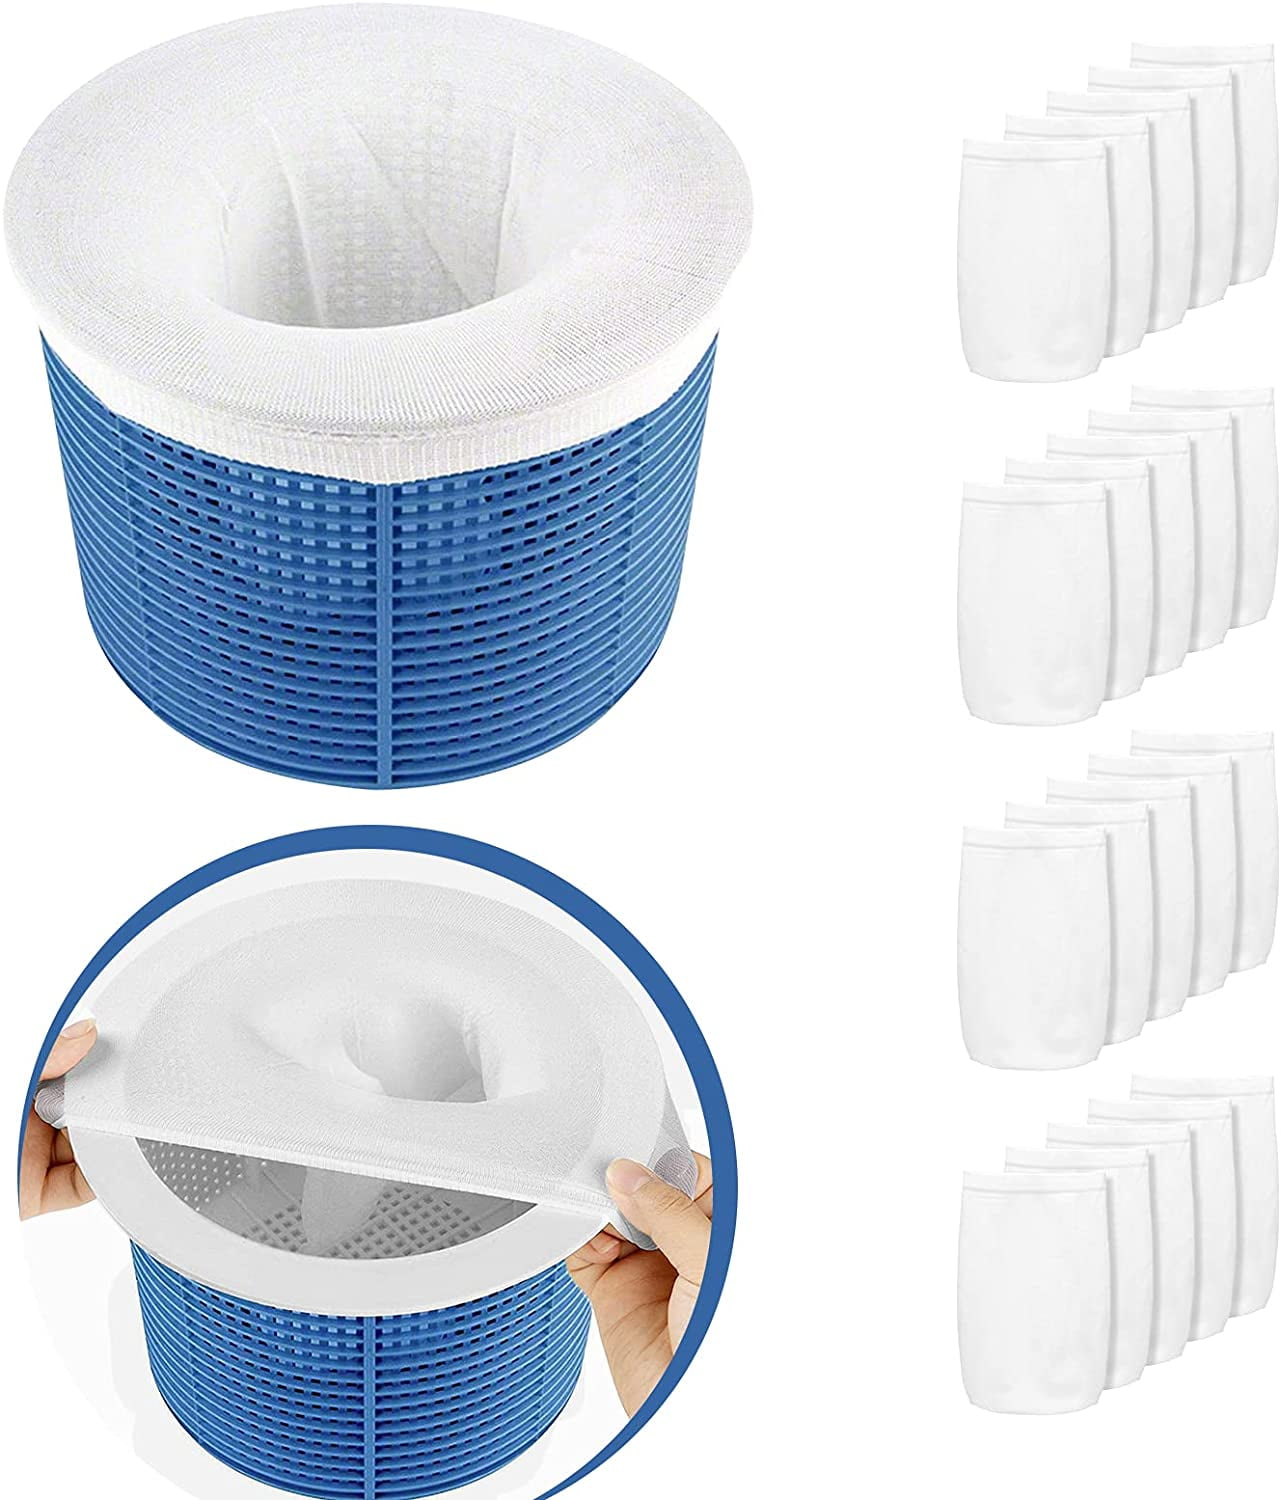 Pack of 6/21 Durable Elastic Nylon Mesh Screen Sock Perfect Filter Savers to Protect Your Filters Hot Tubs & Supplies xiangpian183 Pool Skimmer Socks